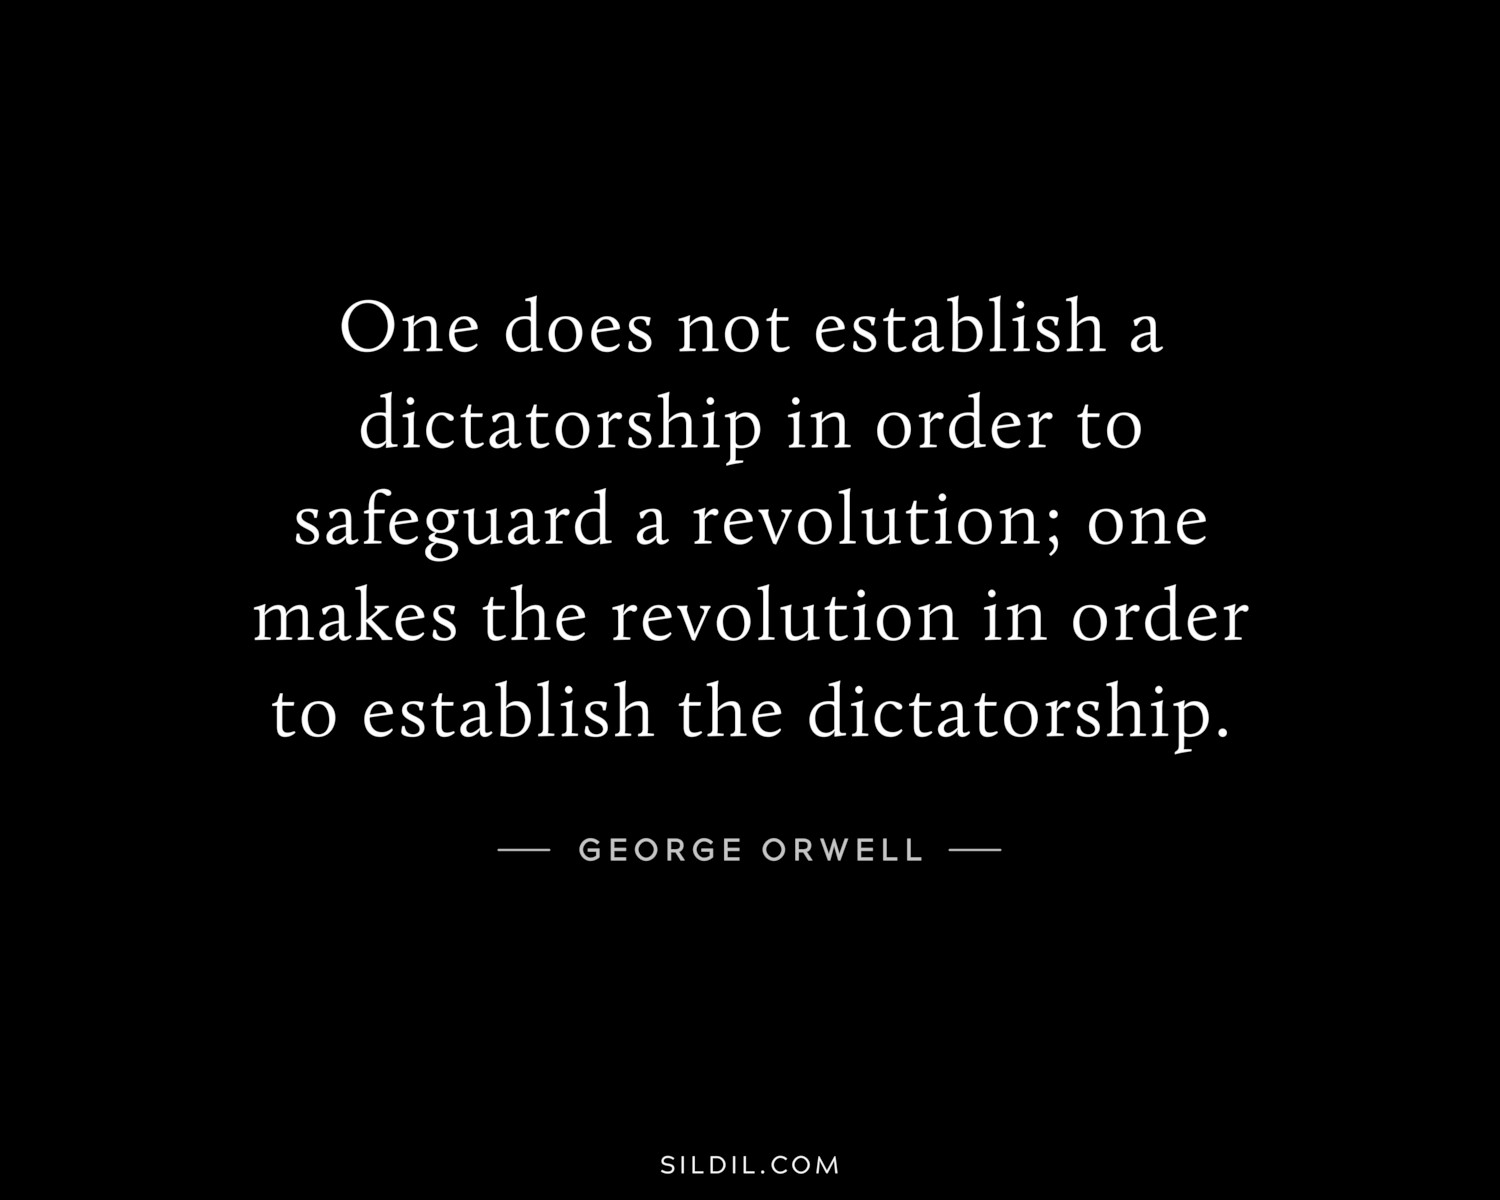 One does not establish a dictatorship in order to safeguard a revolution; one makes the revolution in order to establish the dictatorship.